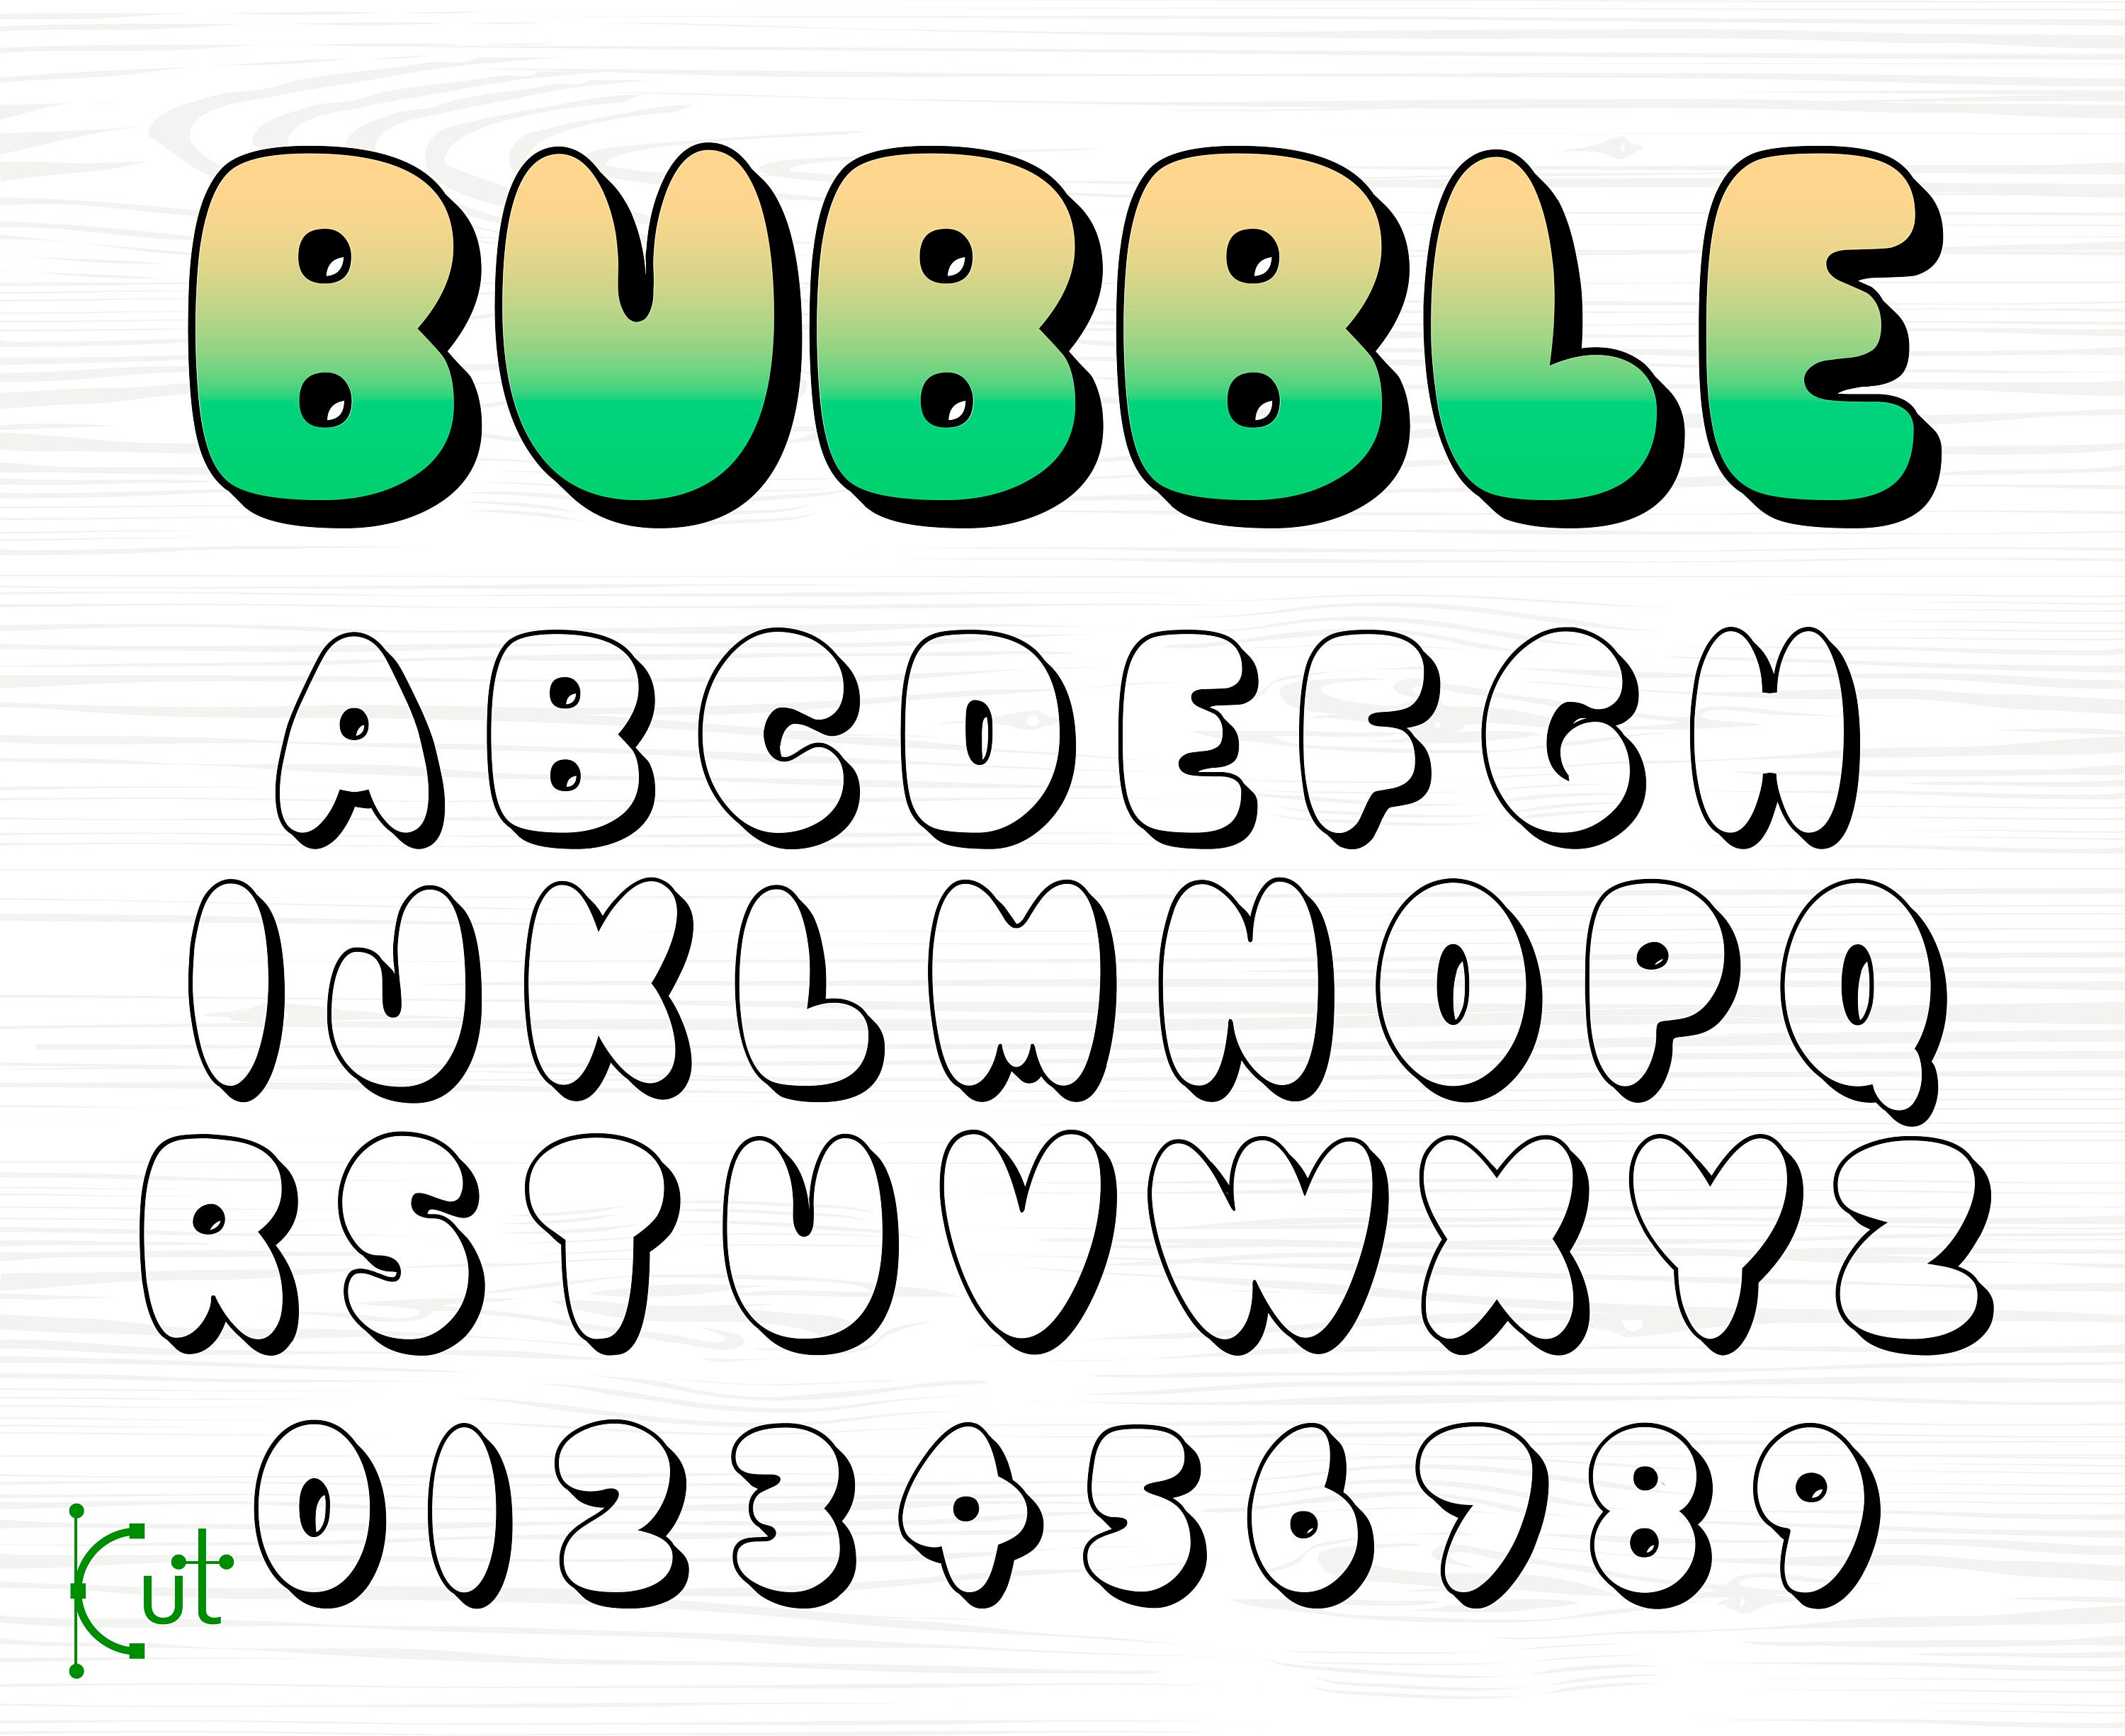 Why Bubble Handwriting?